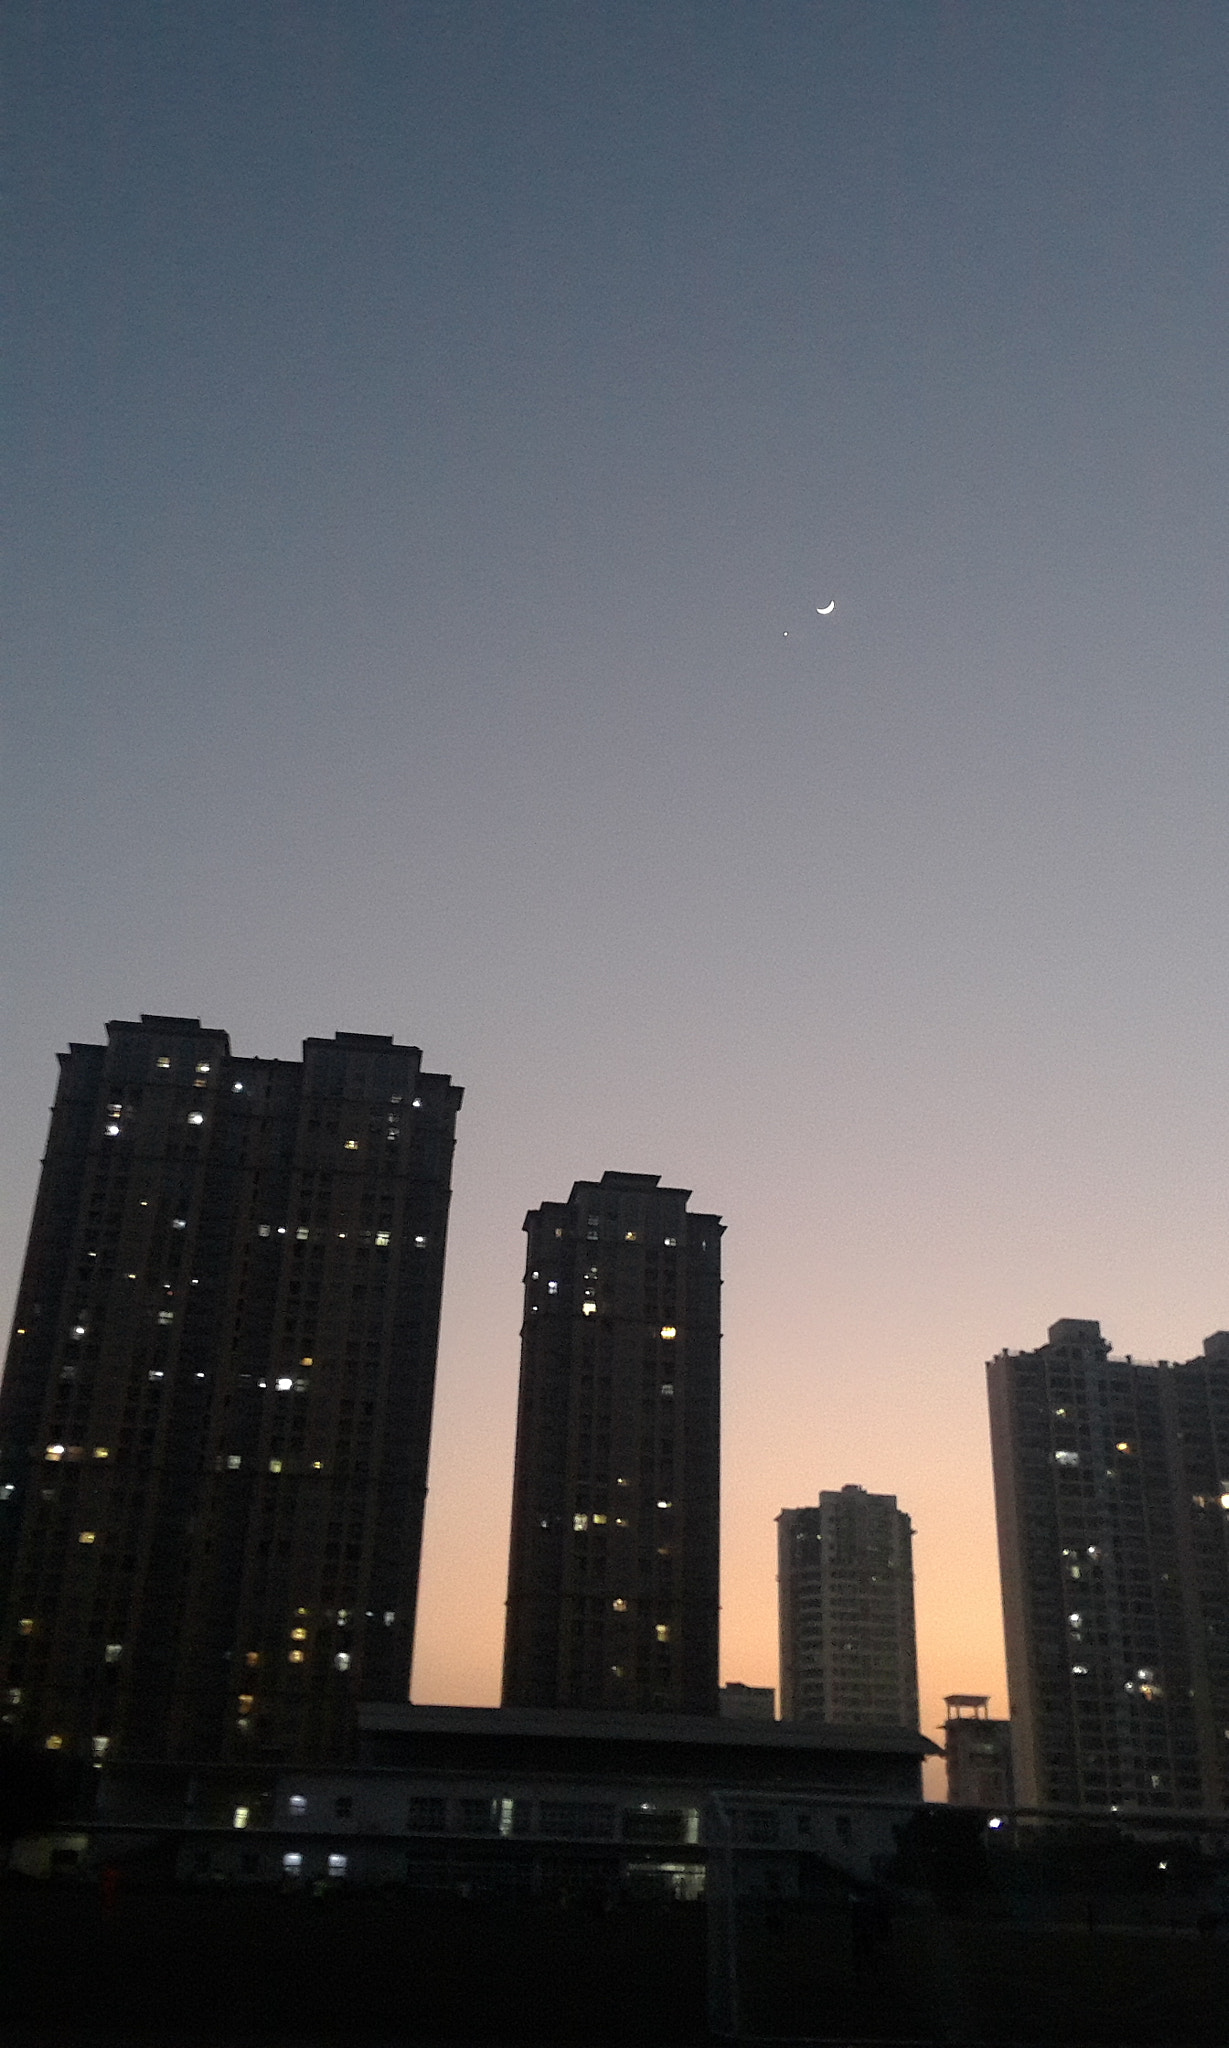 Meizu MX4 Pro sample photo. The star try to hug the moon photography